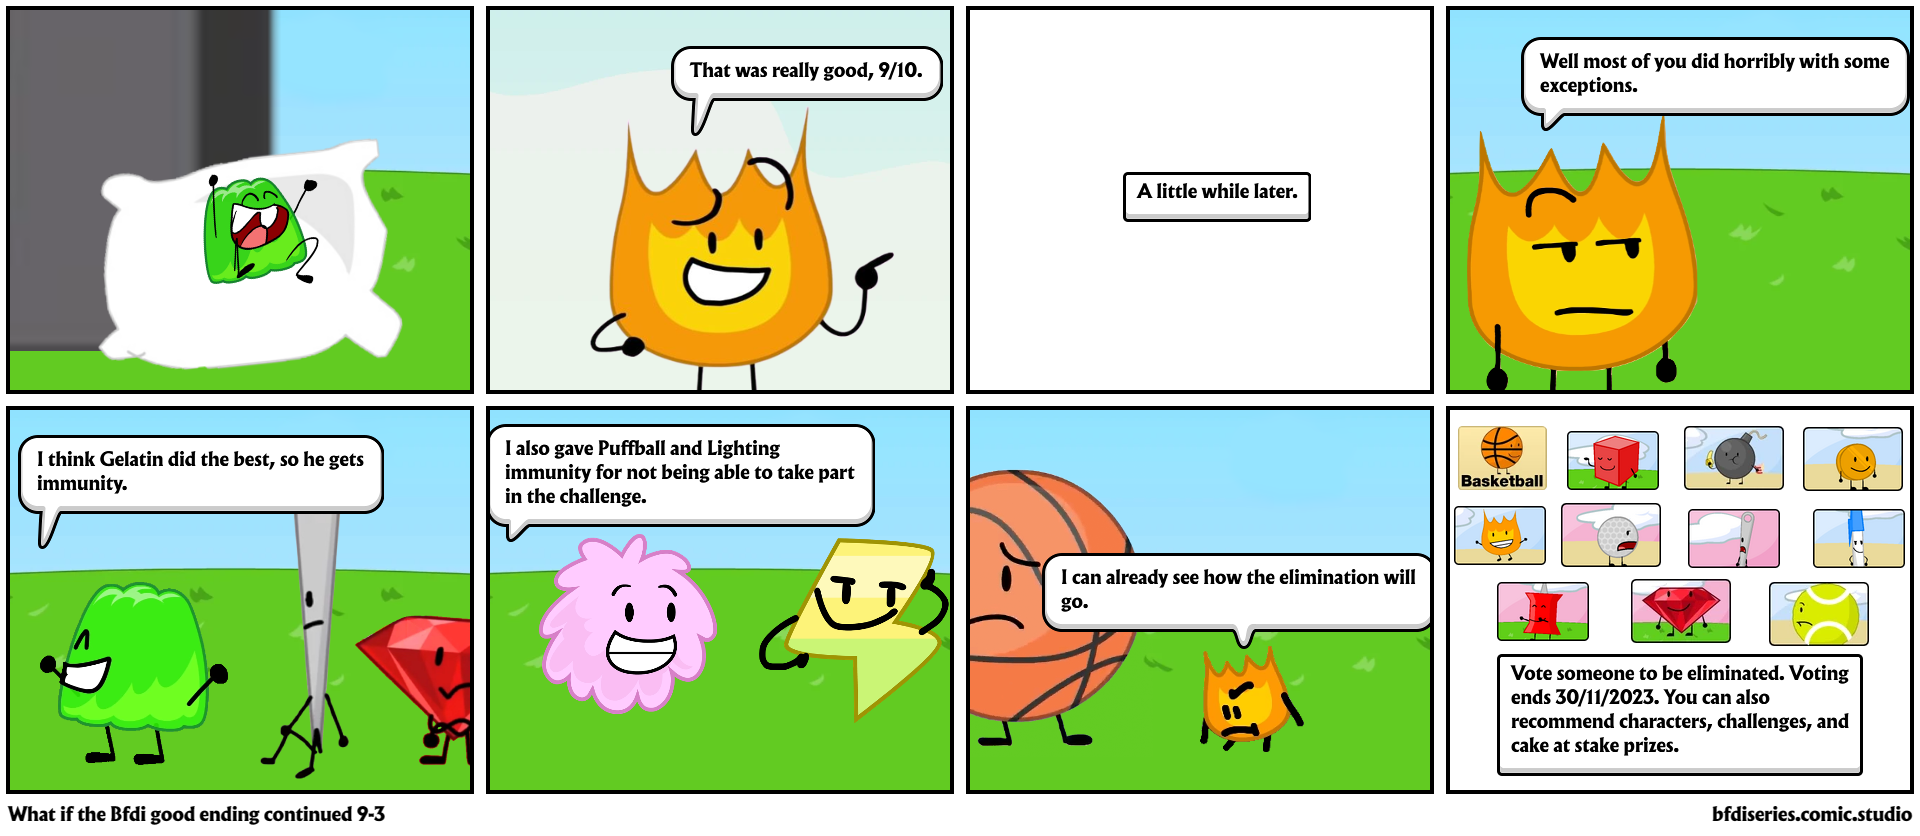 What if the Bfdi good ending continued 9-3 - Comic Studio